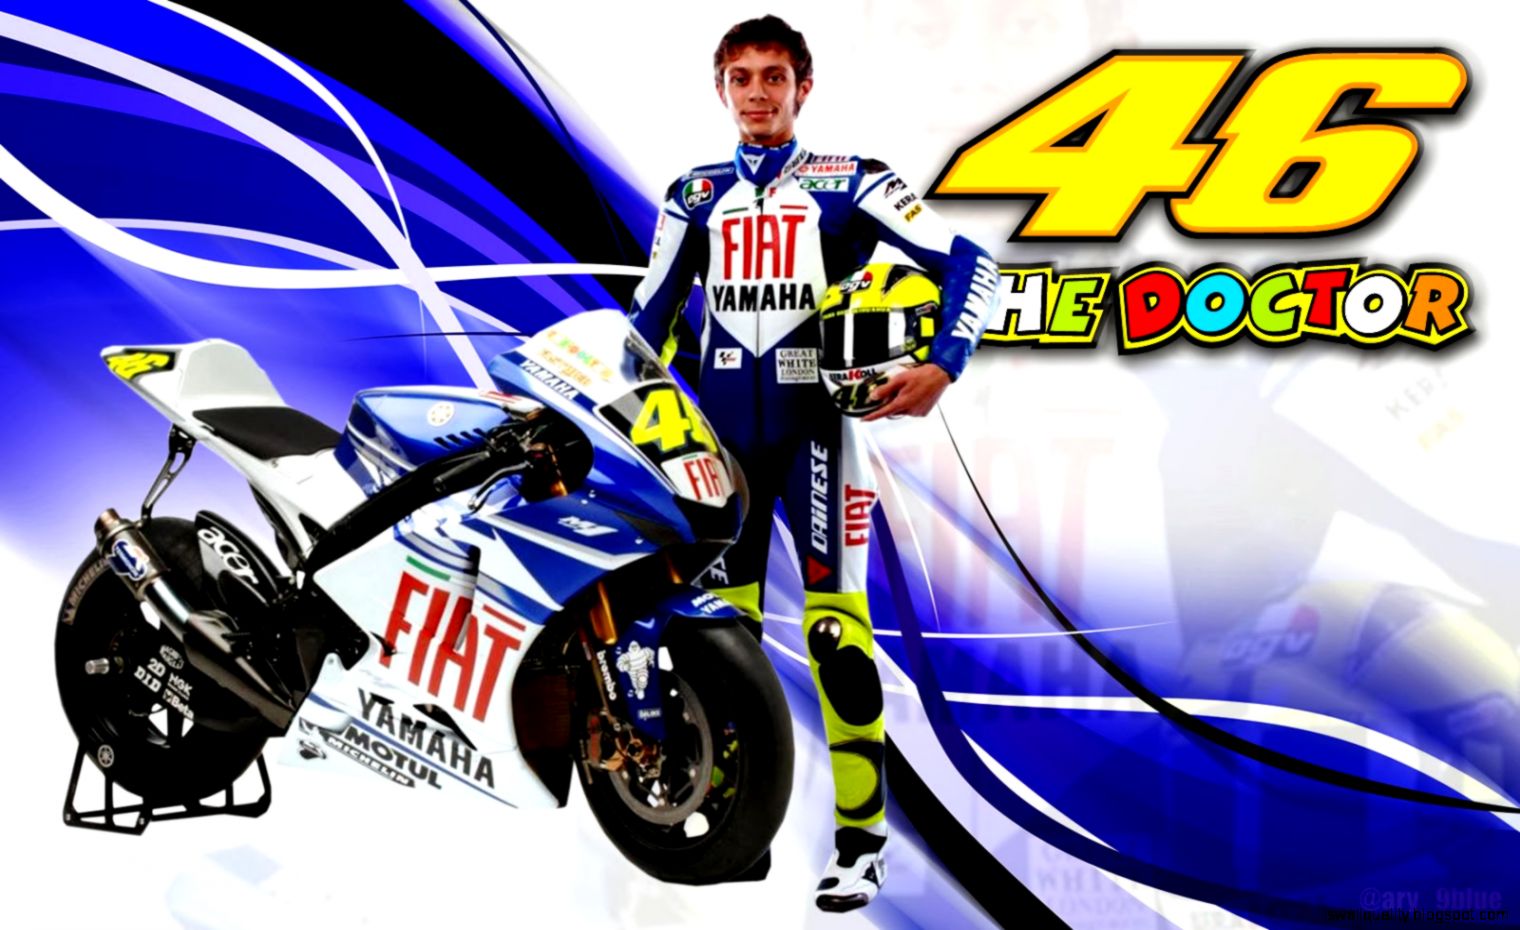 Moto Gp Doctor Valentino Rossi Wallpaper | Wallpapers Quality